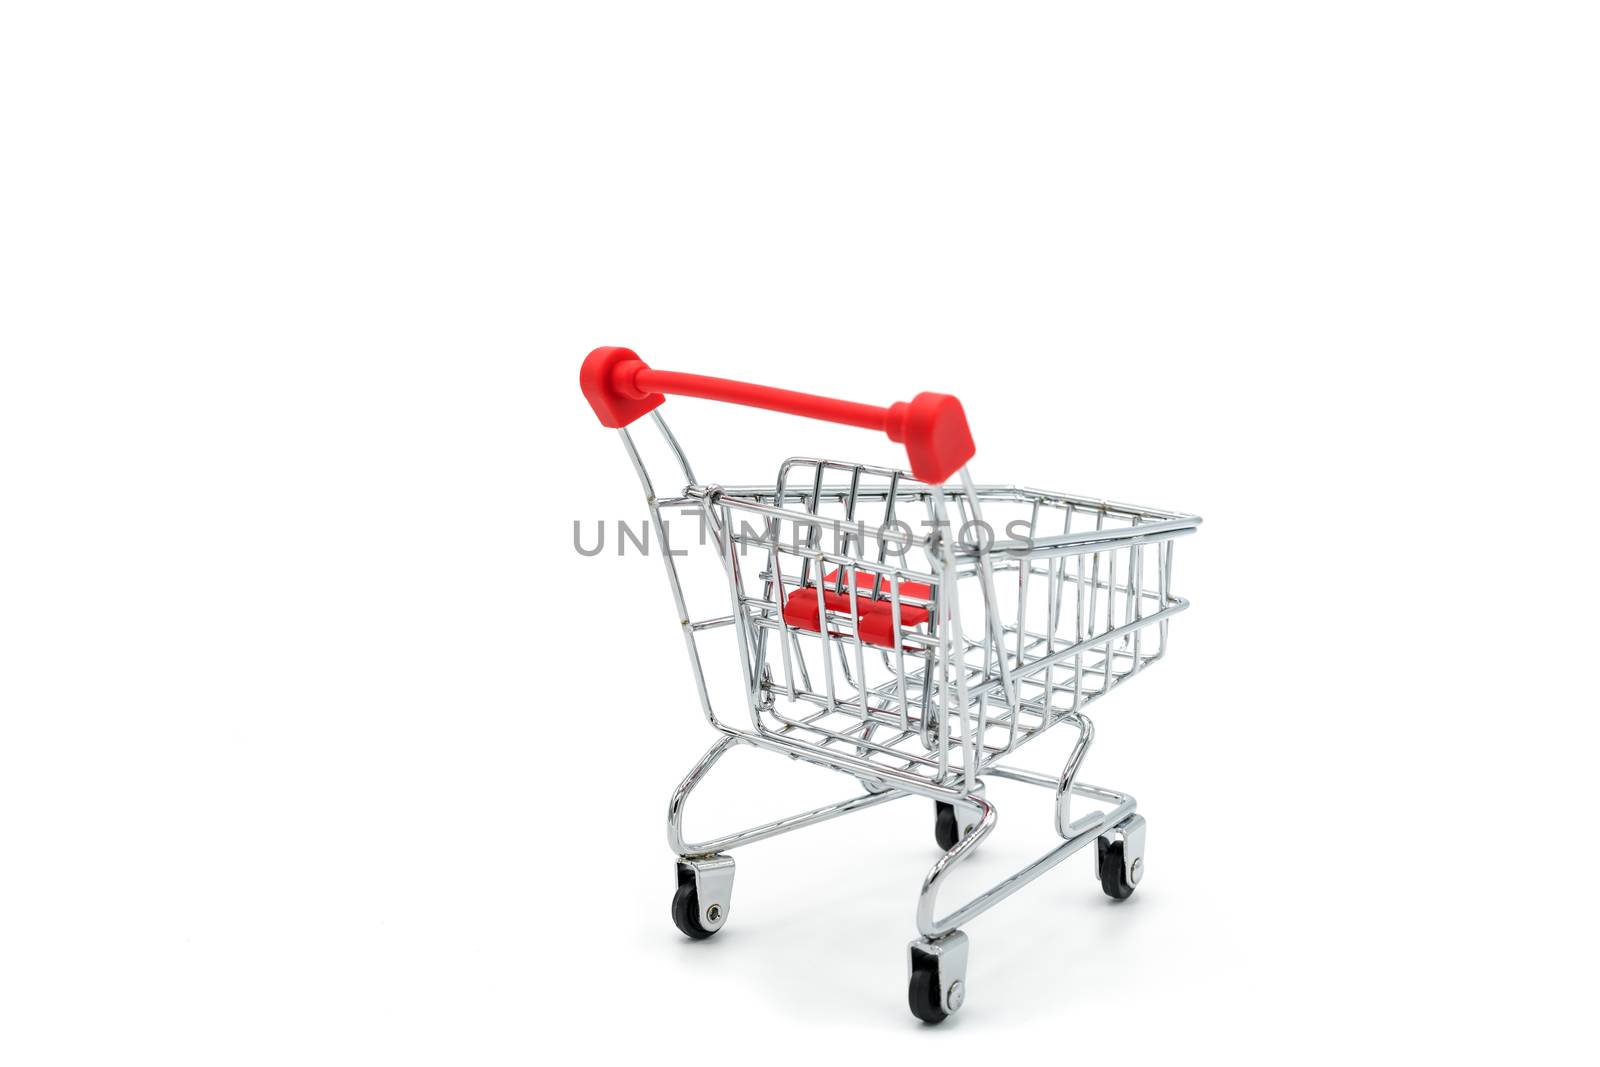 Empty shopping cart trolley isolated on white backgrounds by psodaz